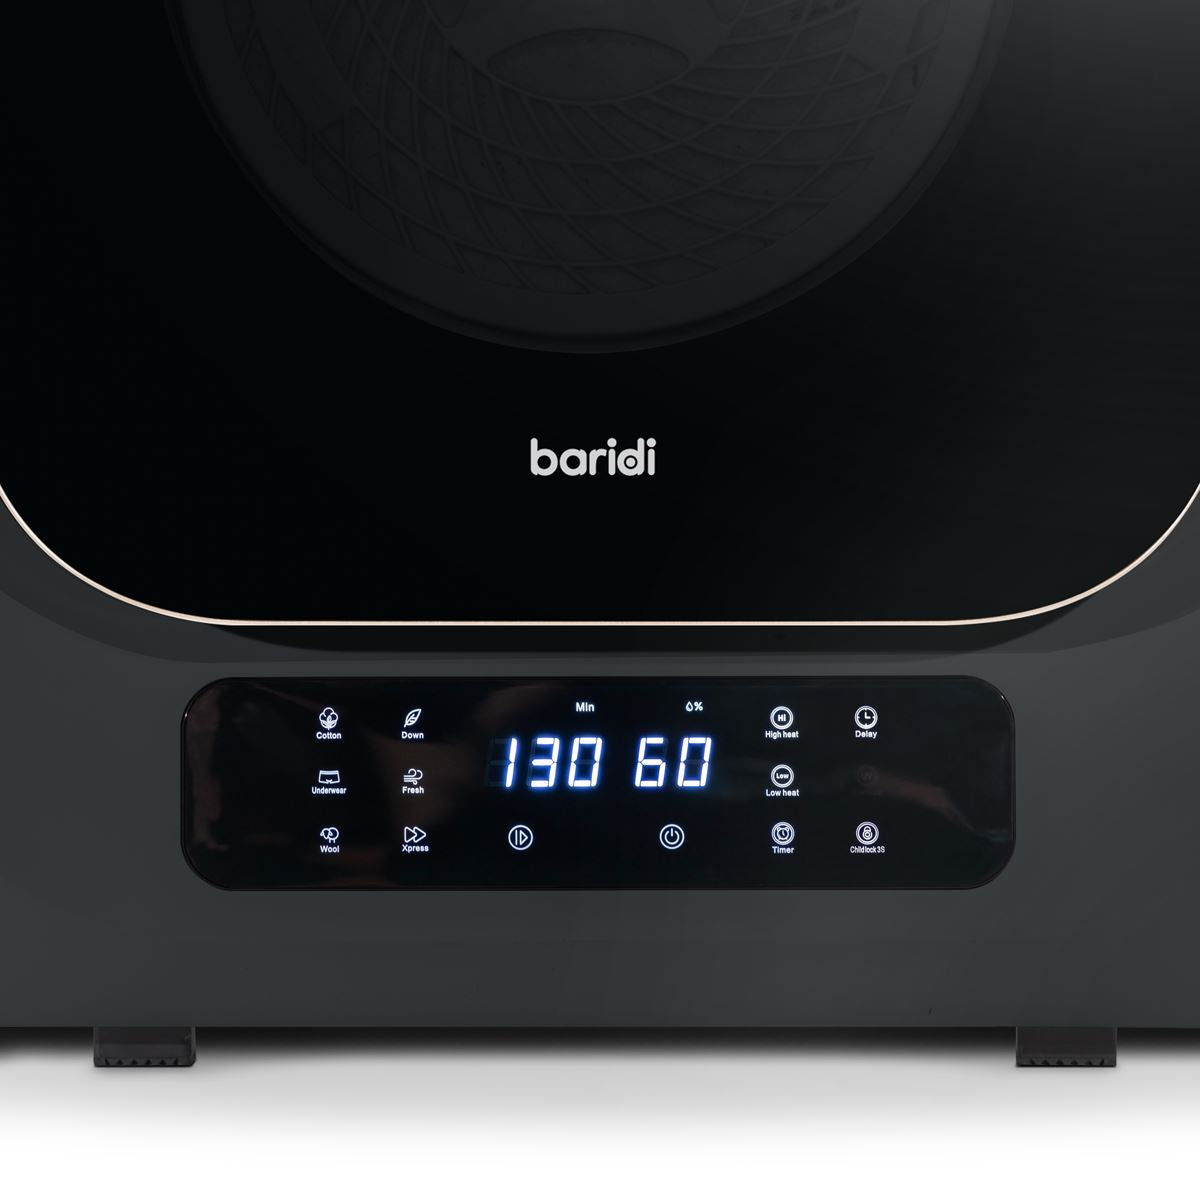 Baridi Small Tumble Dryer, Portable, 2.5kg, Vented, Perfect for Counter Top or Wall Mounted Use with Digital Controls, Compact, Black Mini Spin Dryer - DH229